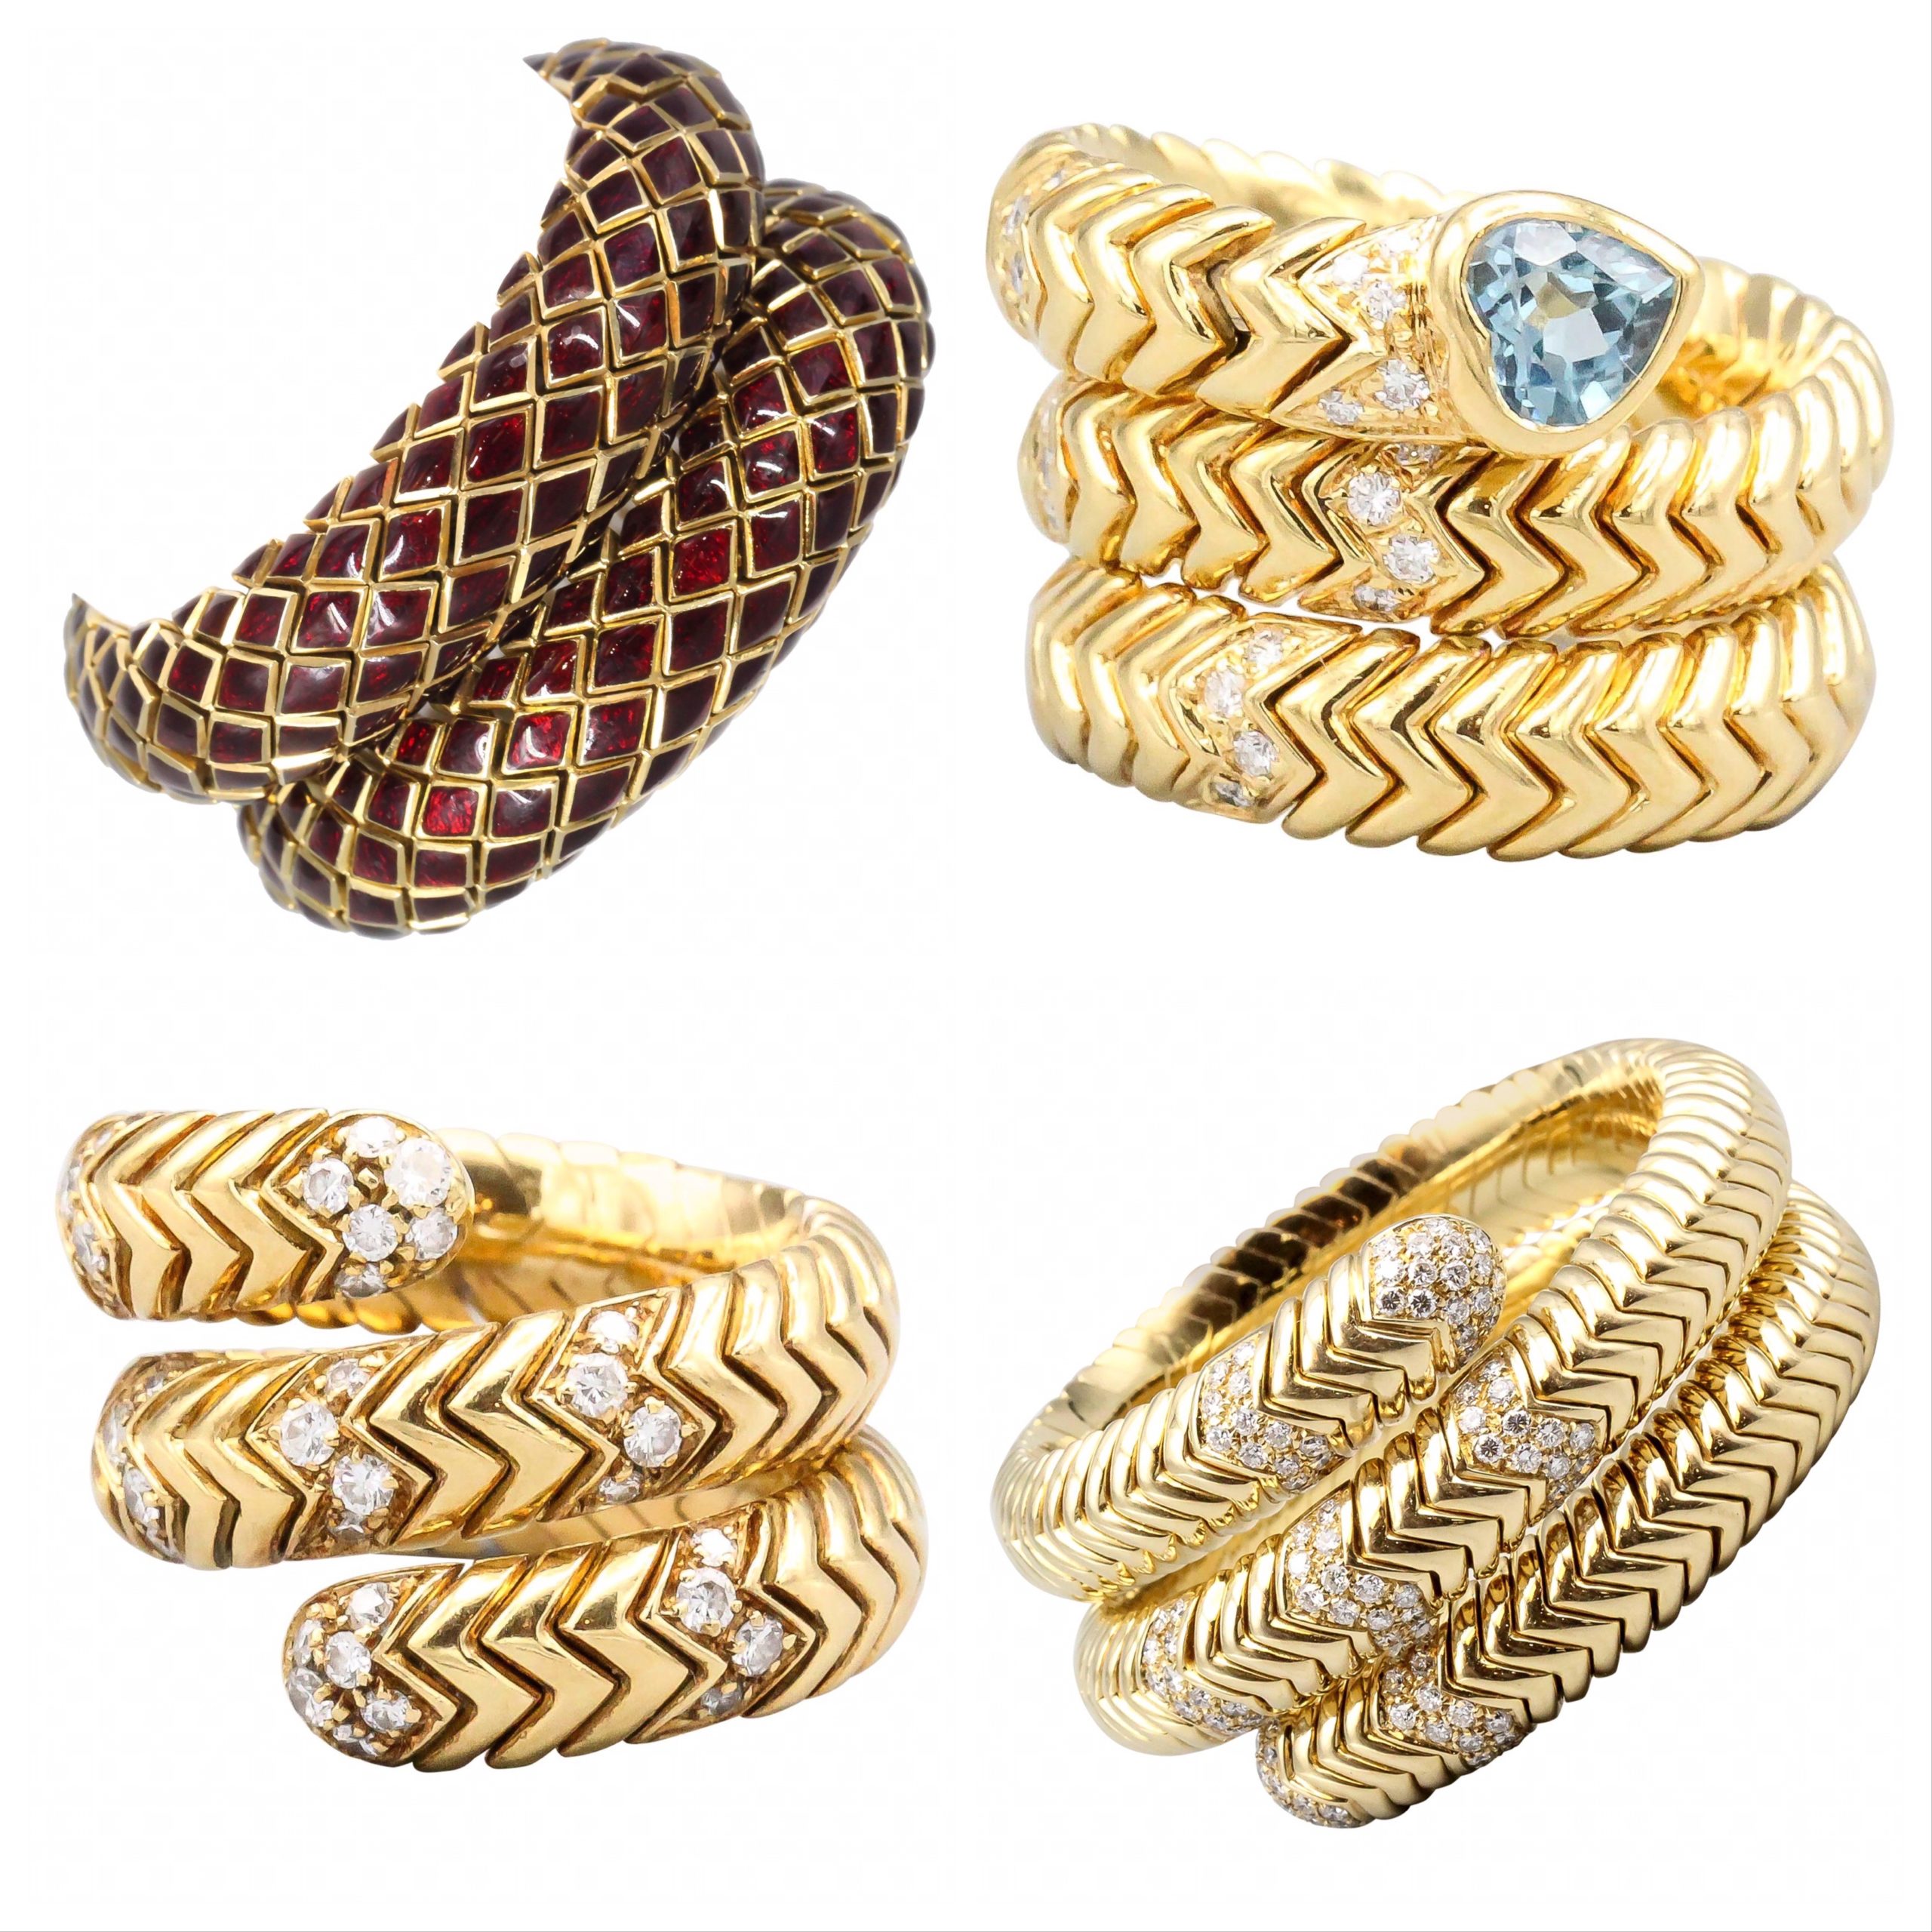 Snake-themed rings and bracelets - at Botier